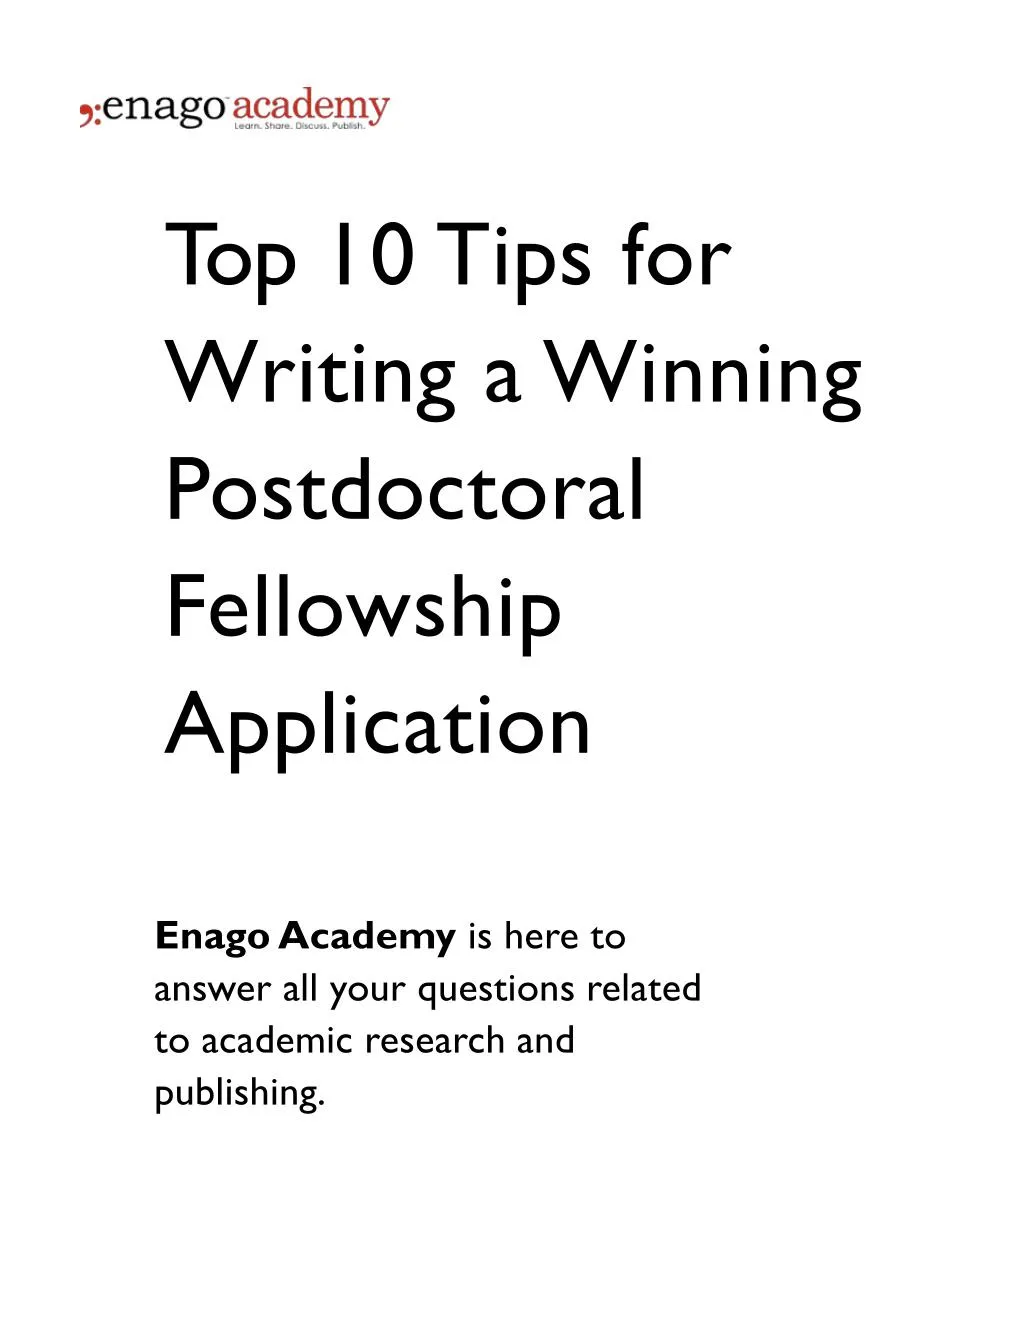 top 10 tips for writing a winning postdoctoral